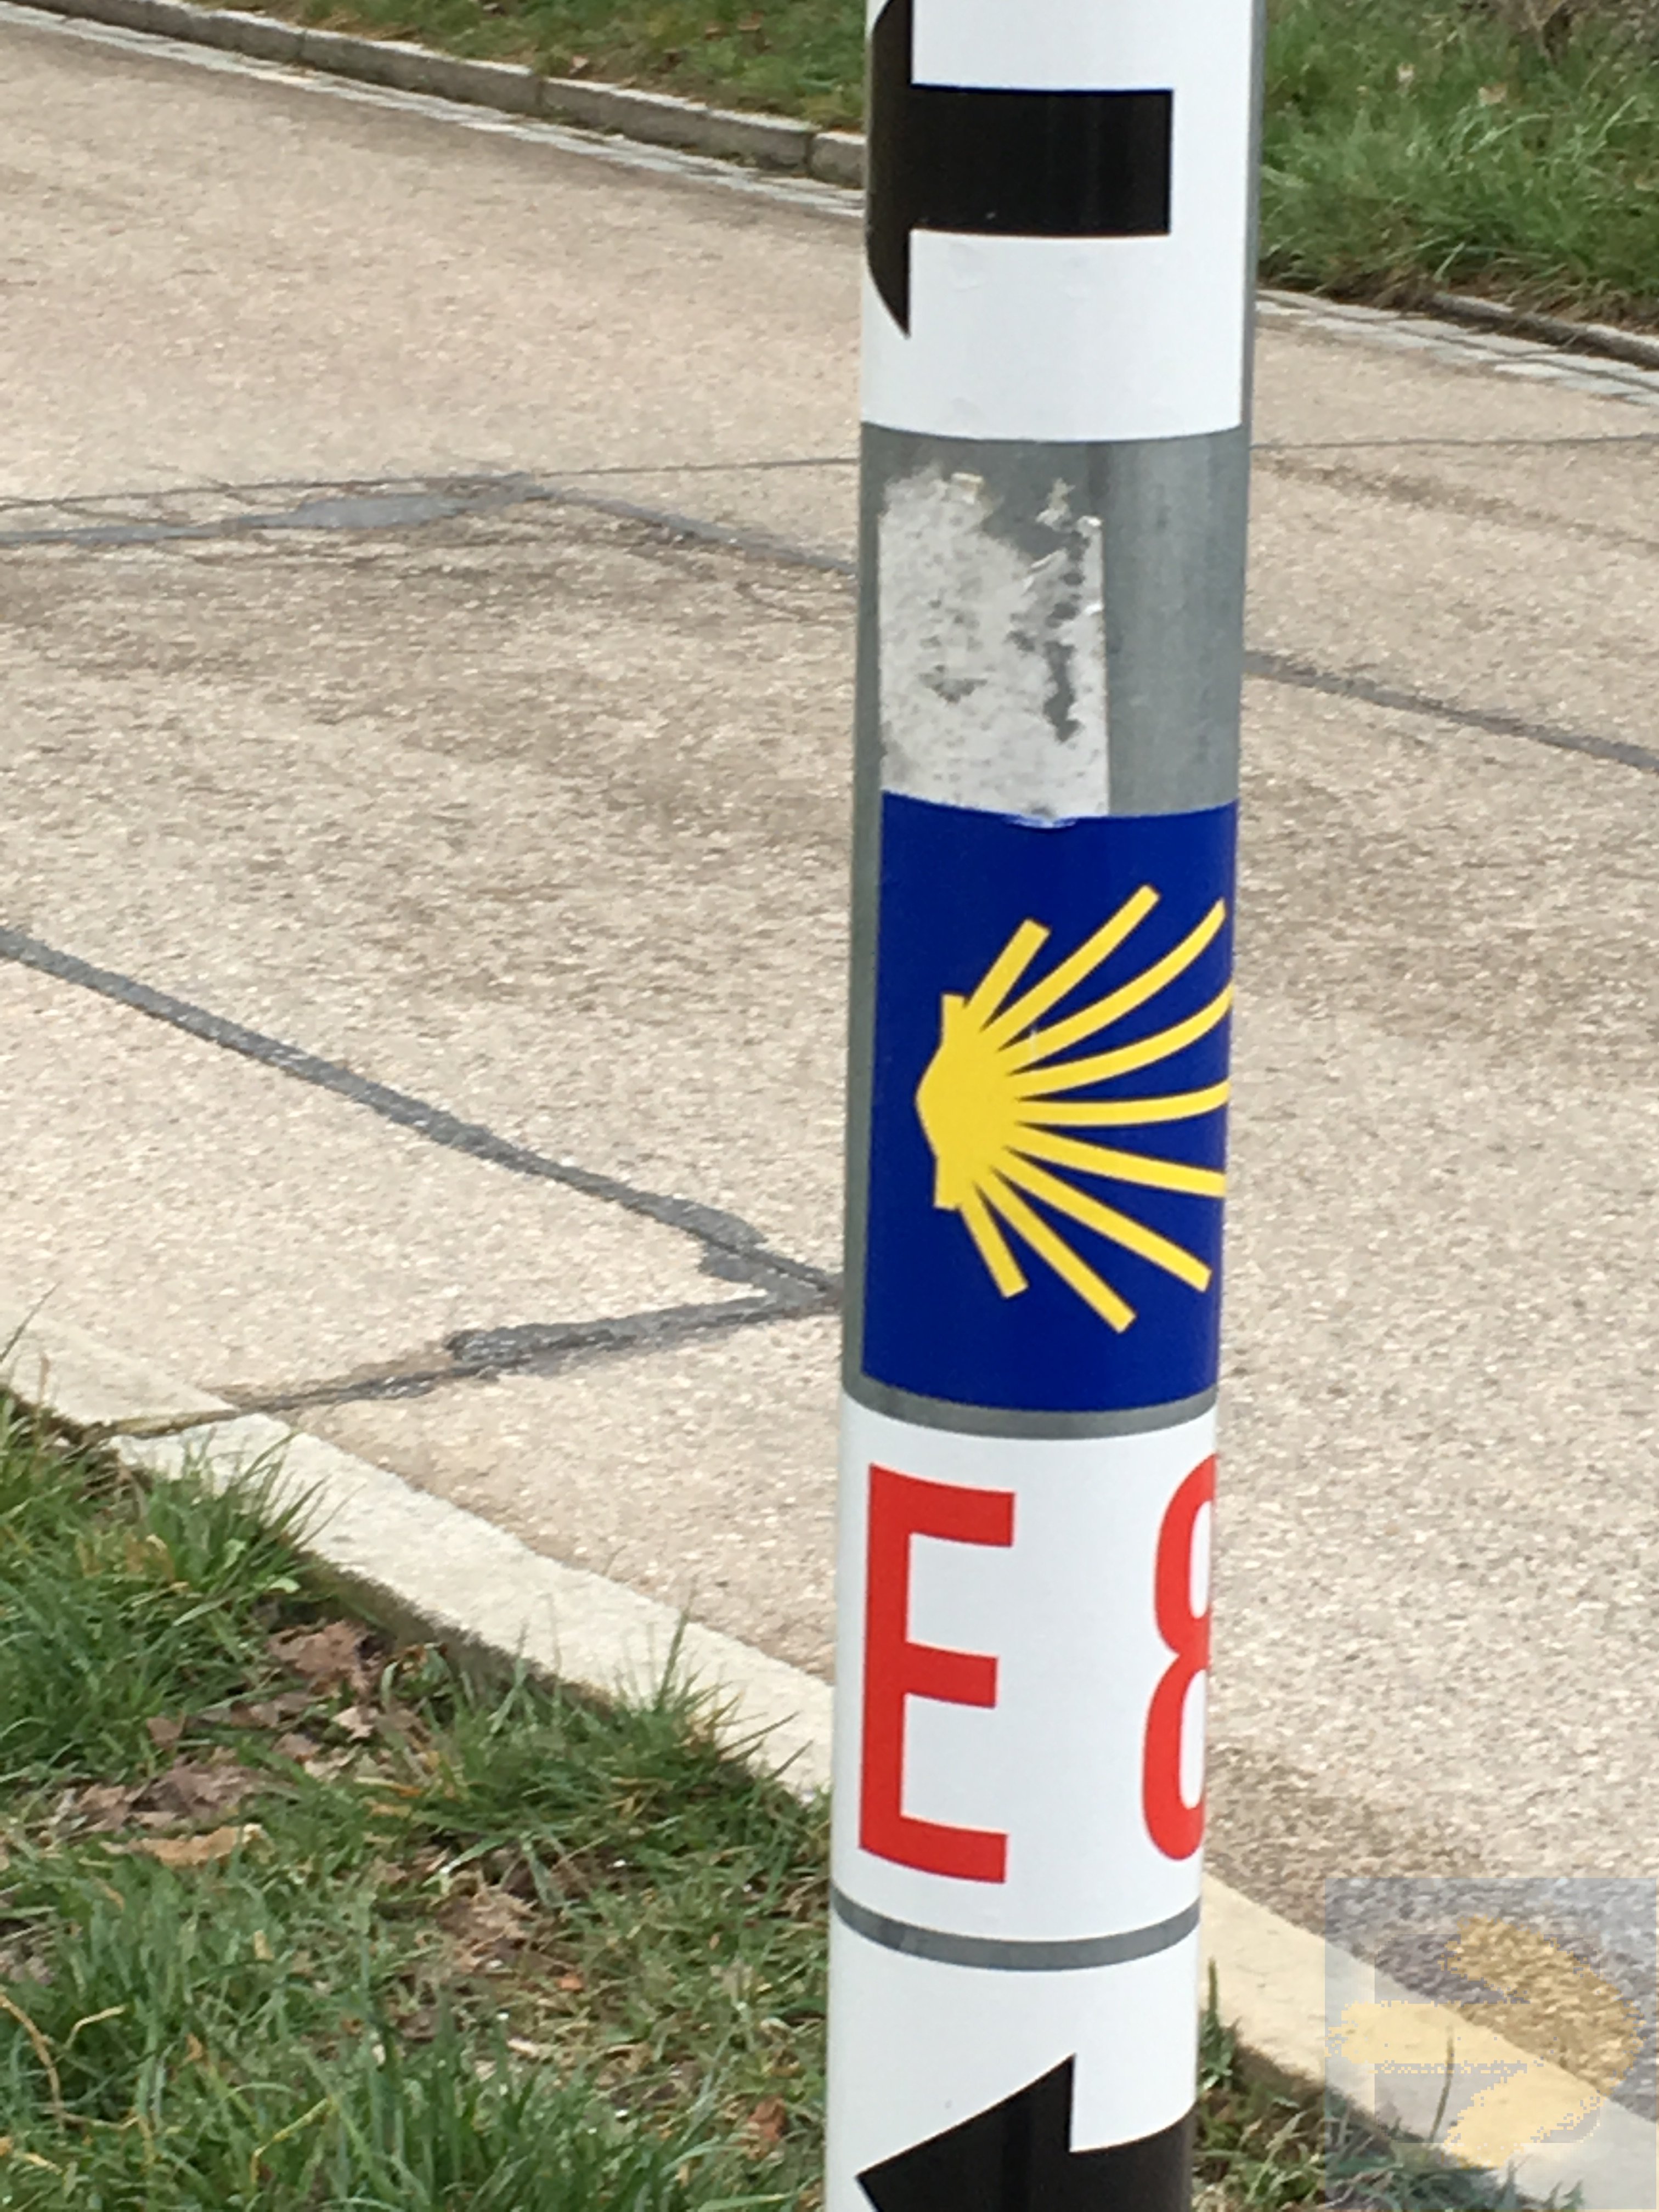 The Camino Sign